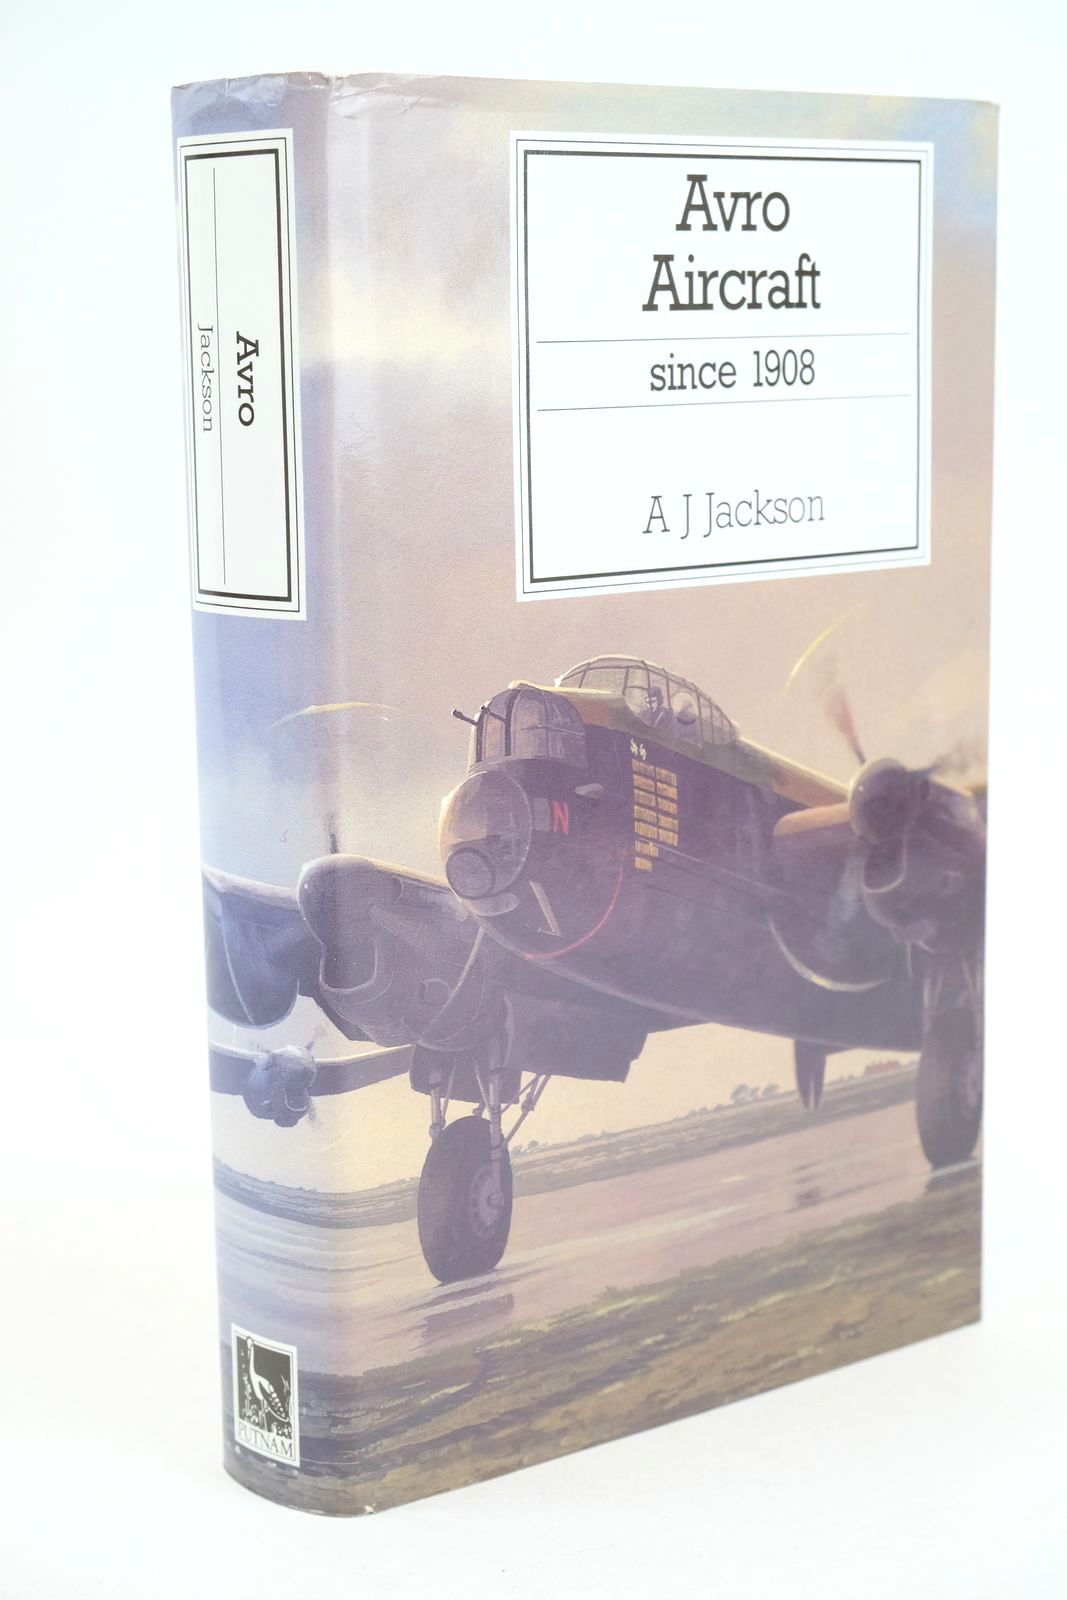 Photo of AVRO AIRCRAFT SINCE 1908 written by Jackson, A.J. Jackson, R.T. published by Putnam (STOCK CODE: 1325569)  for sale by Stella & Rose's Books